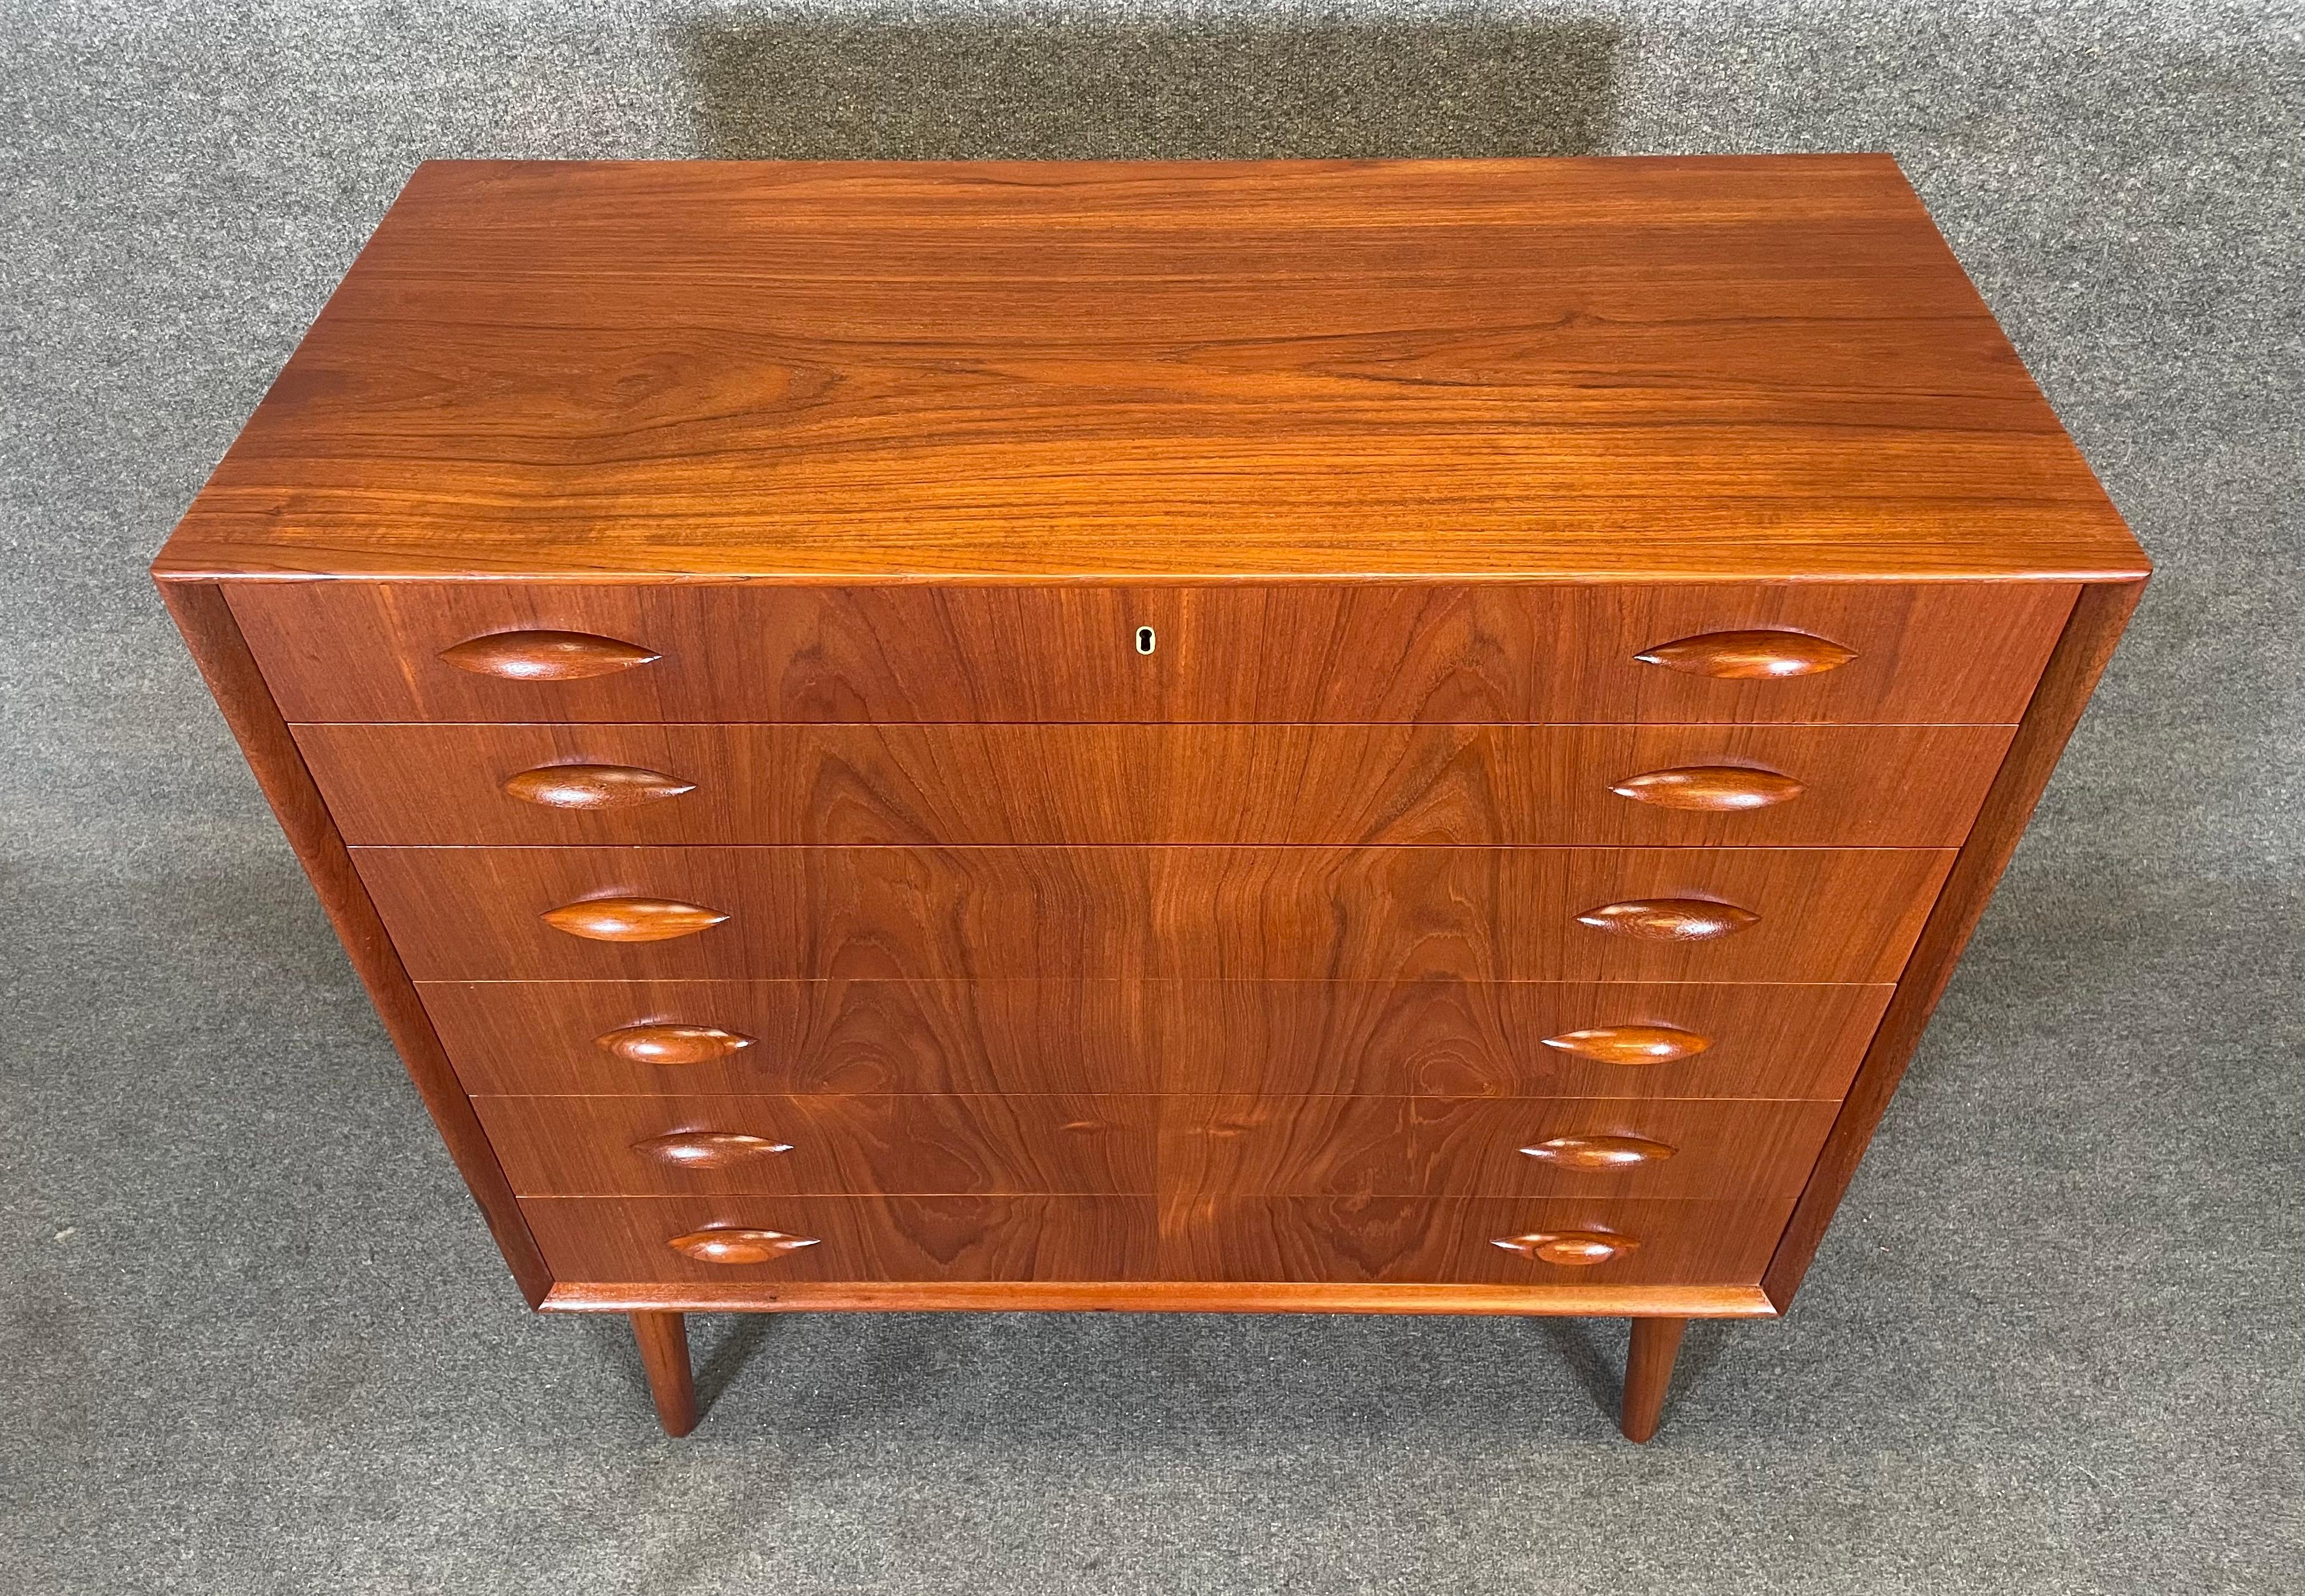 Here is a beautiful scandinavian modern dresser in teak designed by Johannes Sorth and manufactured by Nexxo Mobelfabrik in Denmark in the 1960's.
This lovely piece, recently imported from Europe to California before its refinishing, features a